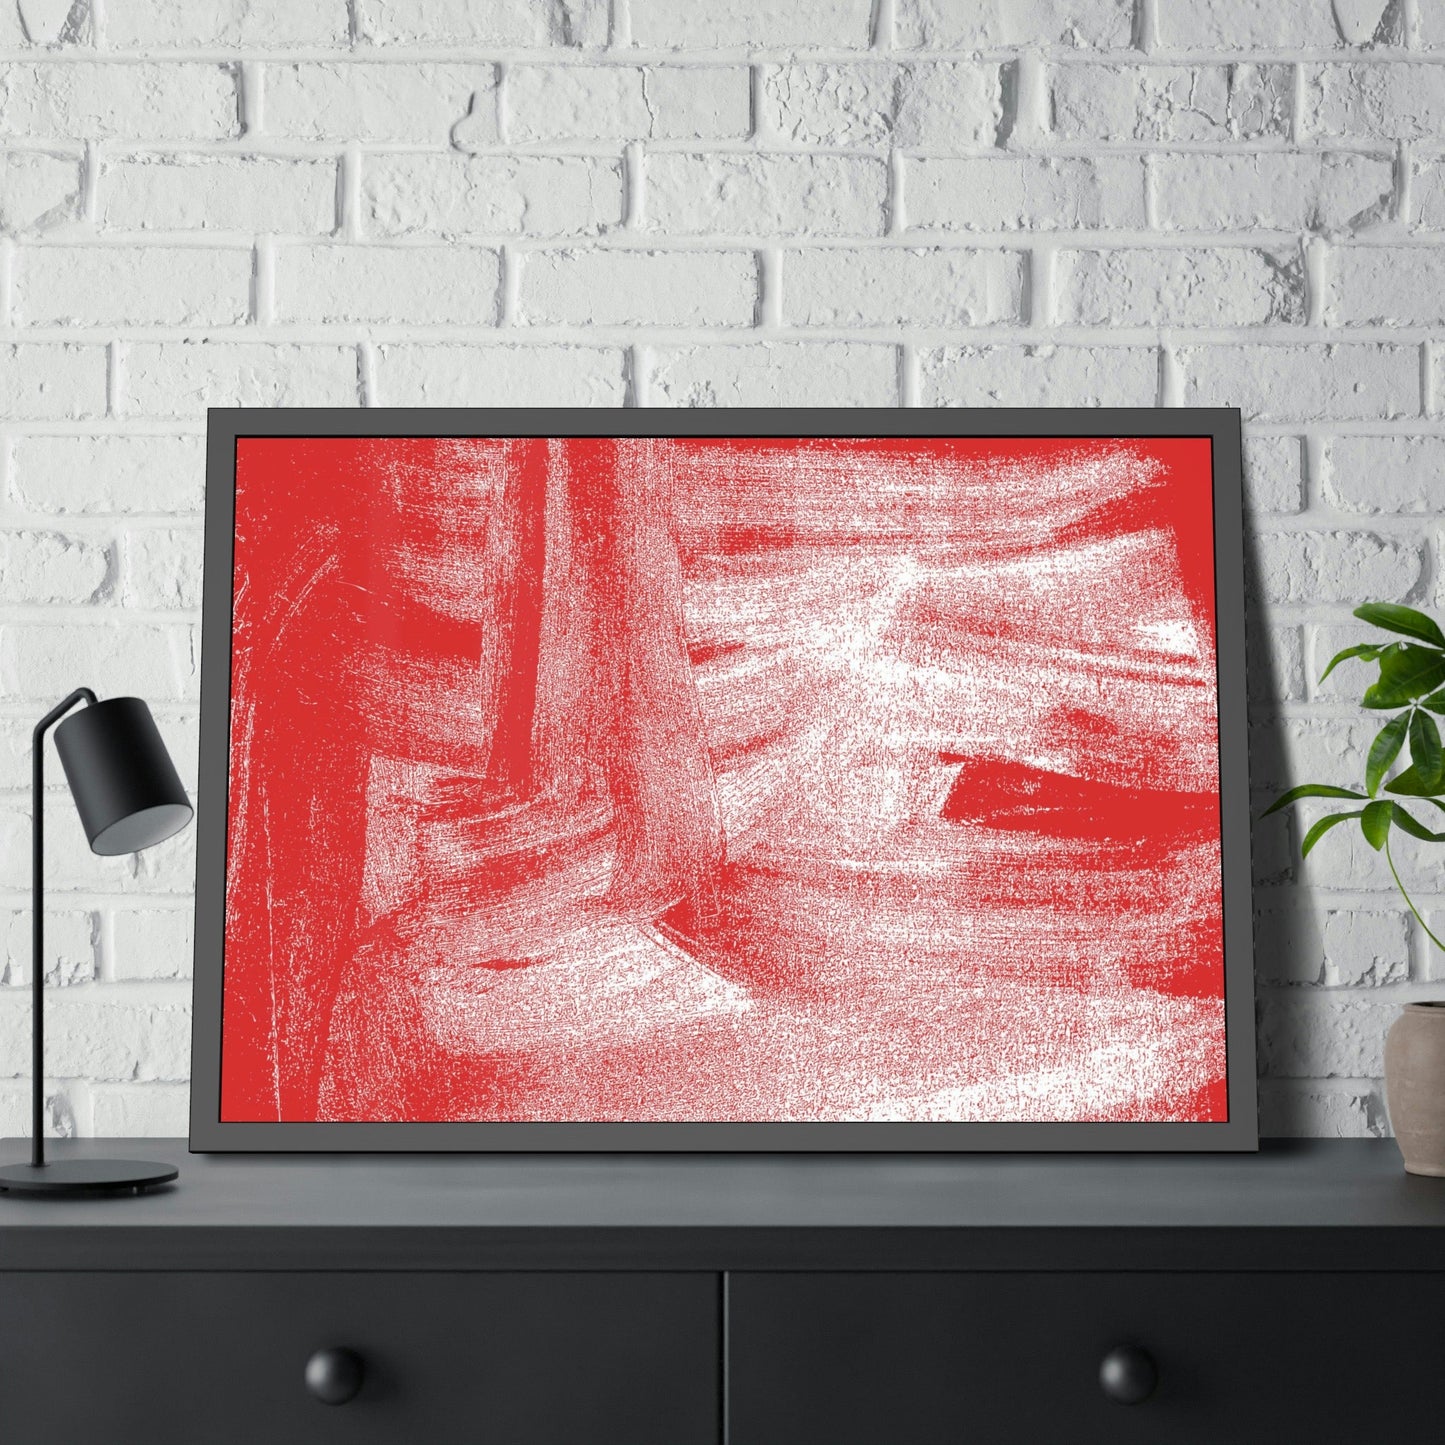 Abstract Energy: A Red Art Print on Poster and Framed Canvas for Your Wall